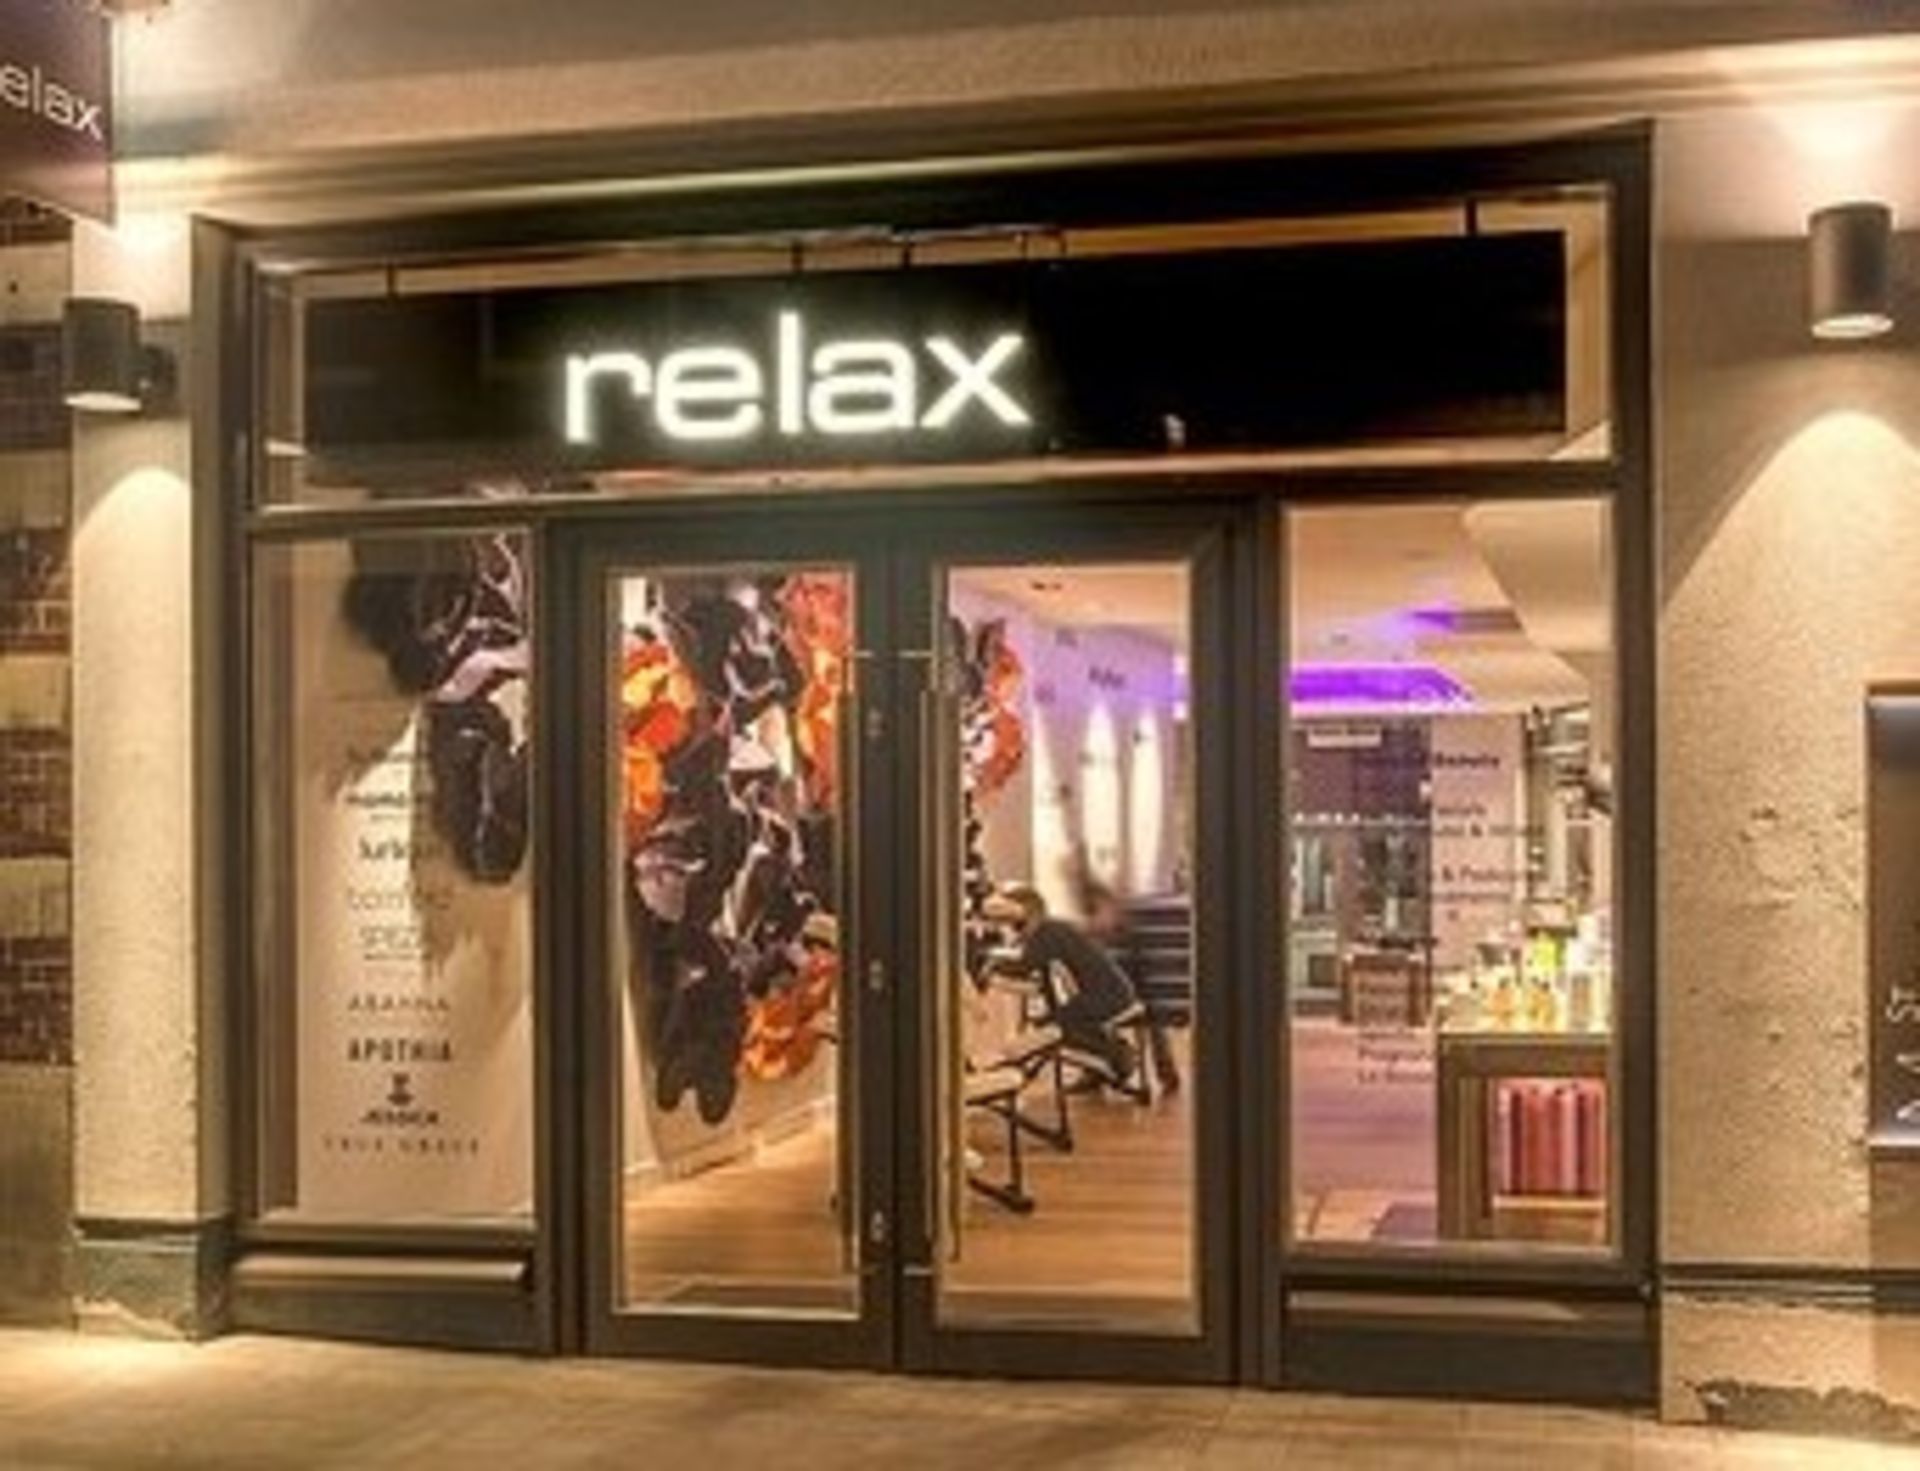 1 x Cool White RELAX Advertisement Illuminated Signage - Individual Perspex Letters Mounted on Rails - Image 4 of 5